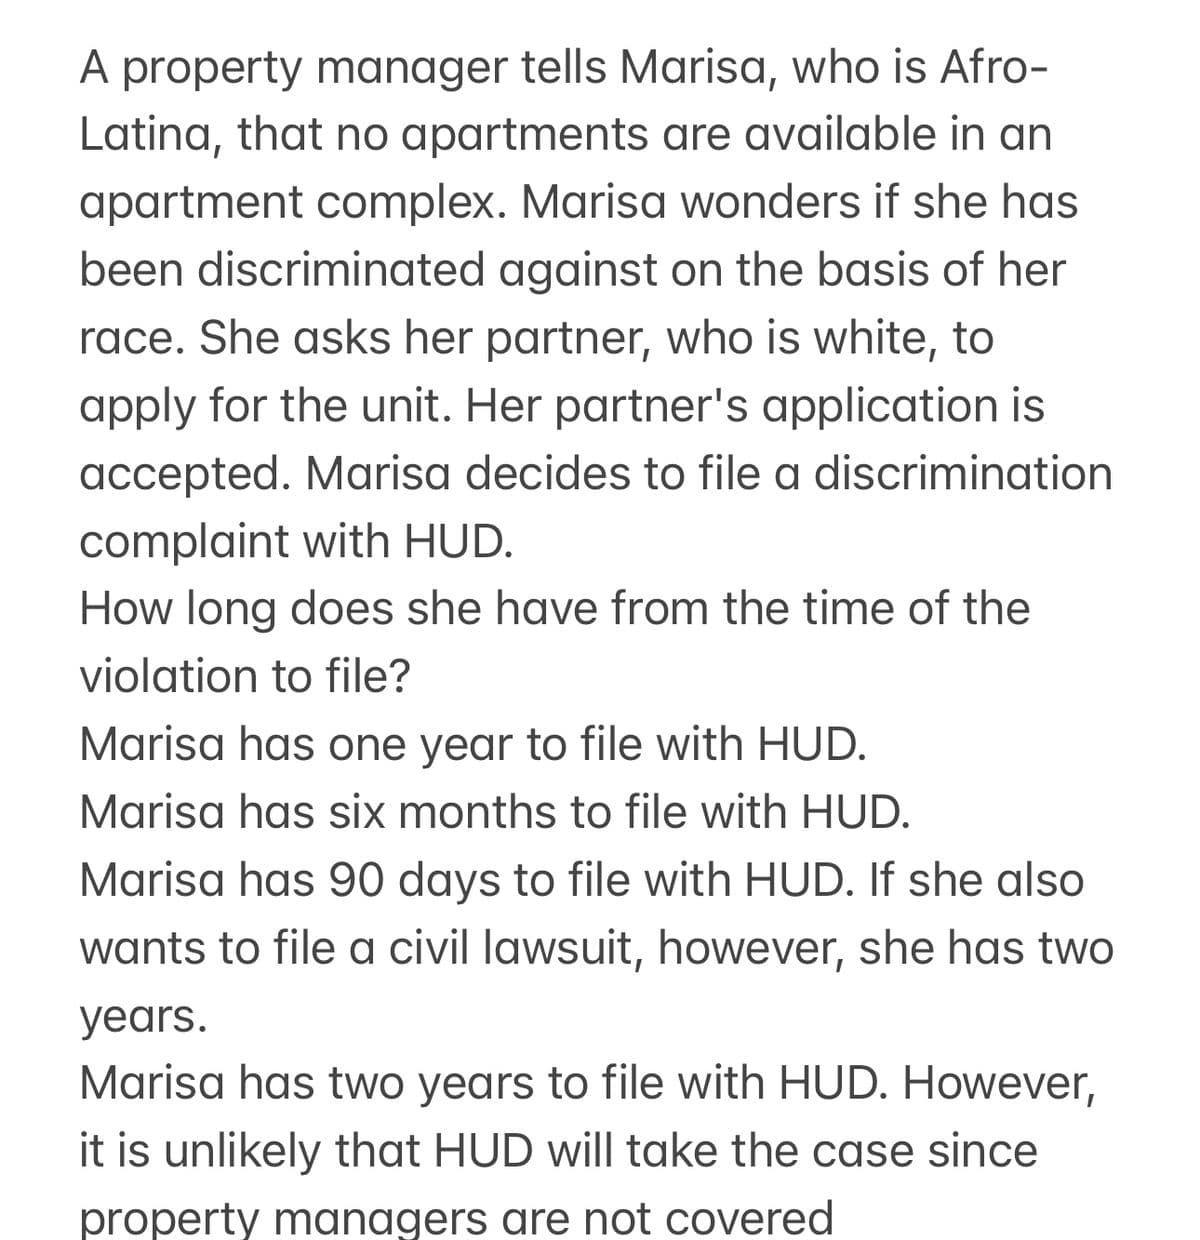 A property manager tells Marisa, who is Afro-
Latina, that no apartments are available in an
apartment complex. Marisa wonders if she has
been discriminated against on the basis of her
race. She asks her partner, who is white, to
apply for the unit. Her partner's application is
accepted. Marisa decides to file a discrimination
complaint with HUD.
How long does she have from the time of the
violation to file?
Marisa has one year to file with HUD.
Marisa has six months to file with HUD.
Marisa has 90 days to file with HUD. If she also
wants to file a civil lawsuit, however, she has two
years.
Marisa has two years to file with HUD. However,
it is unlikely that HUD will take the case since
property managers are not covered